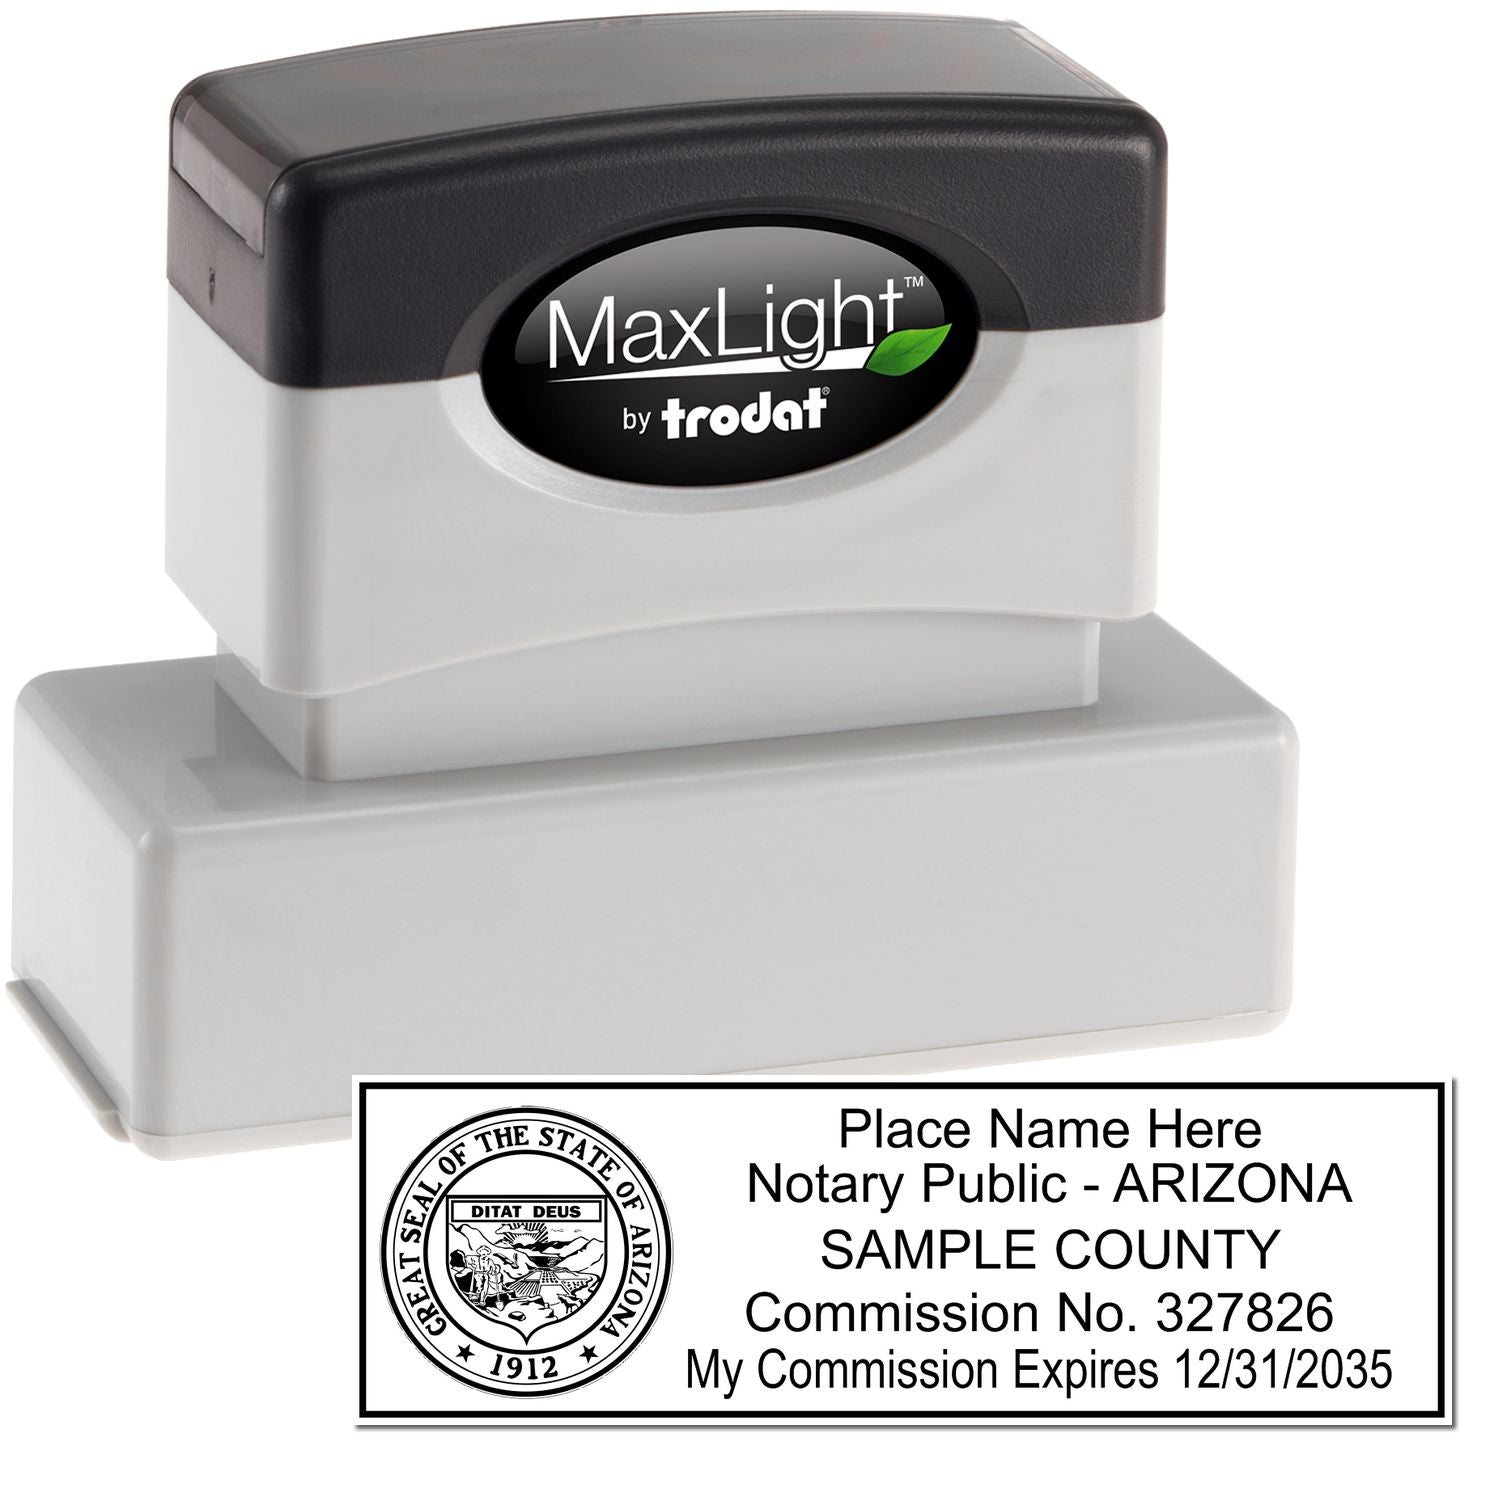 The main image for the MaxLight Premium Pre-Inked Arizona State Seal Notarial Stamp depicting a sample of the imprint and electronic files